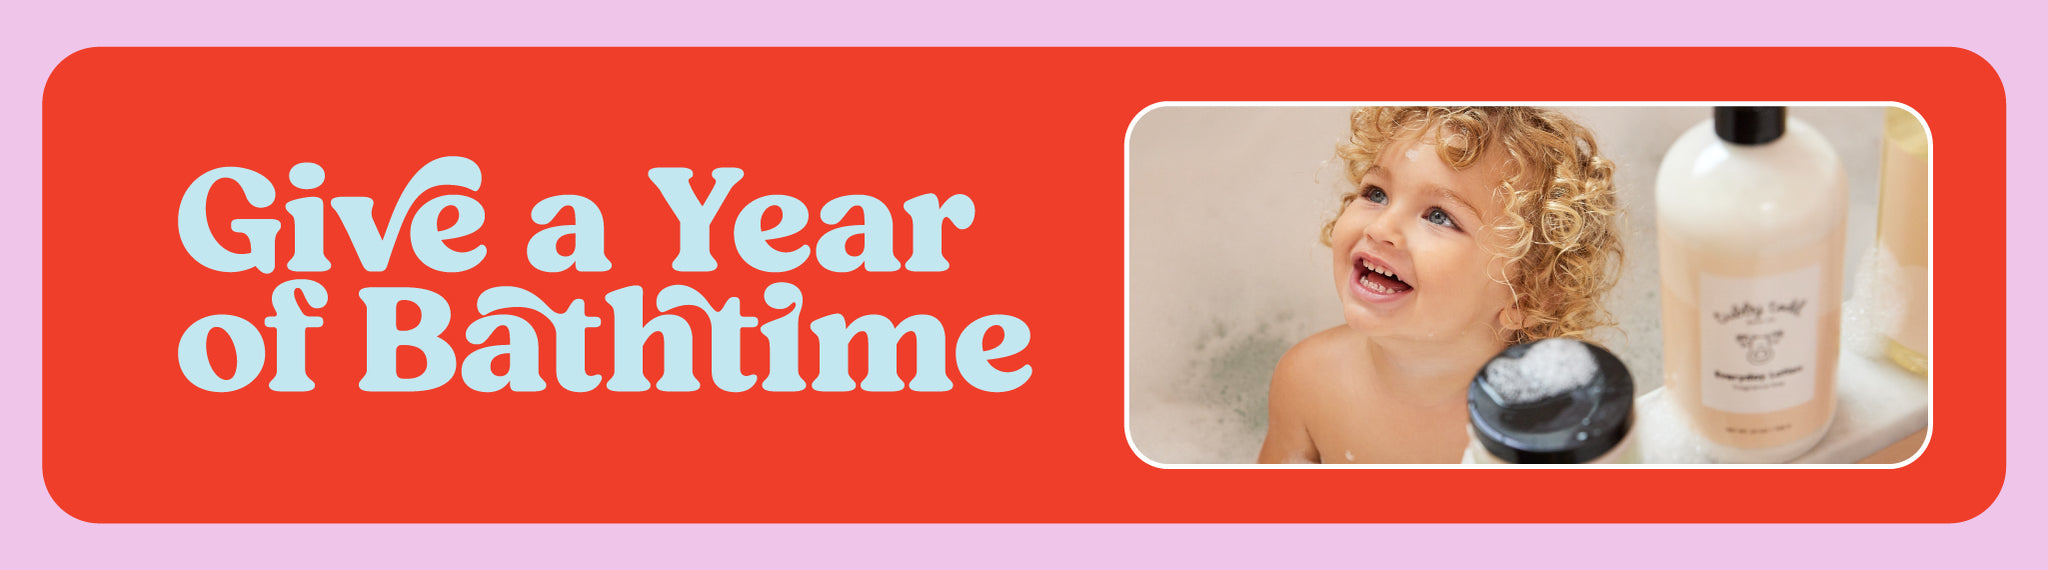 Give a year of bathtime! 